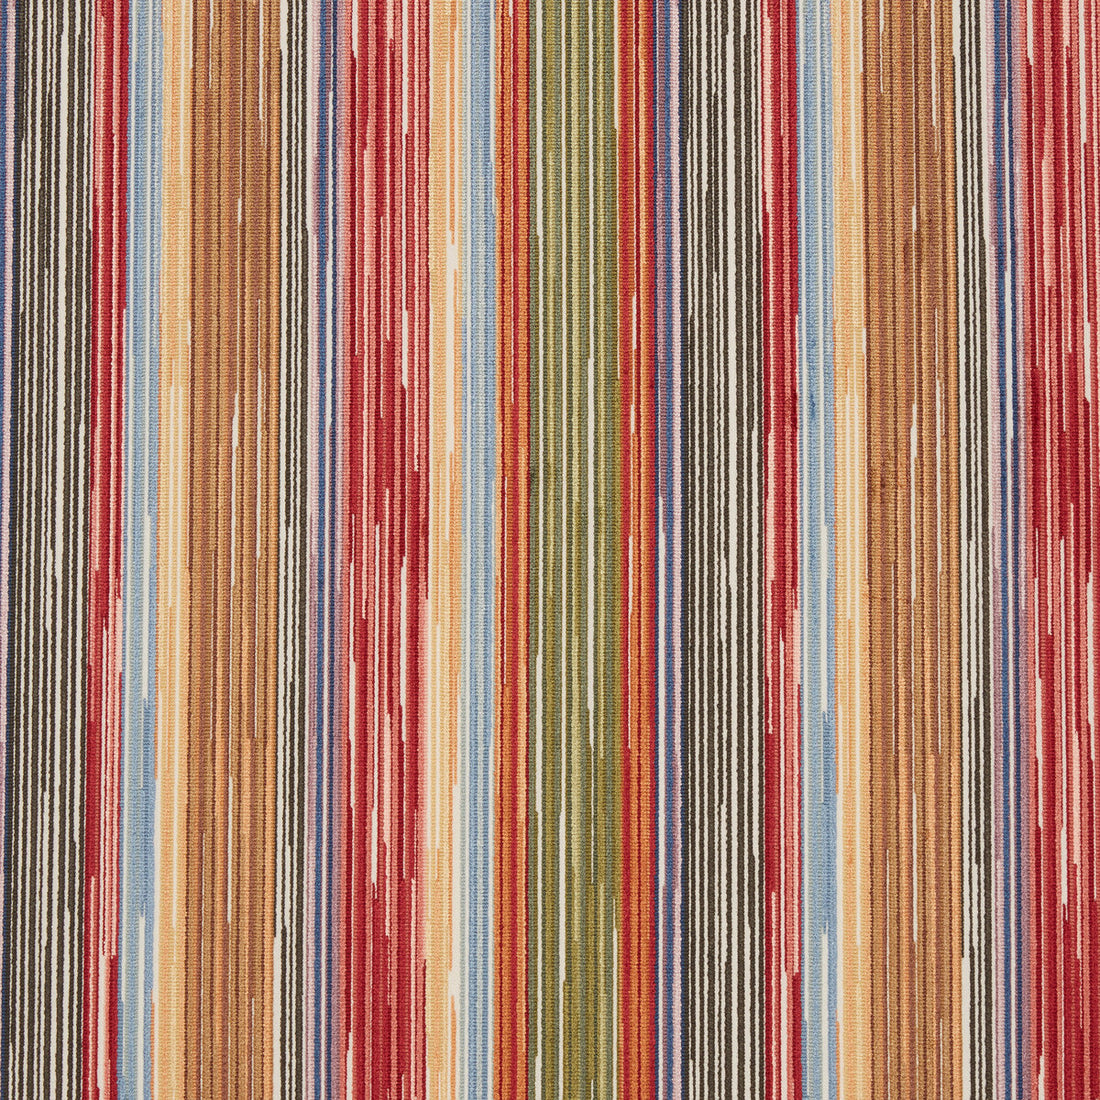 Bangor fabric in 159 color - pattern 36701.912.0 - by Kravet Couture in the Missoni Home collection